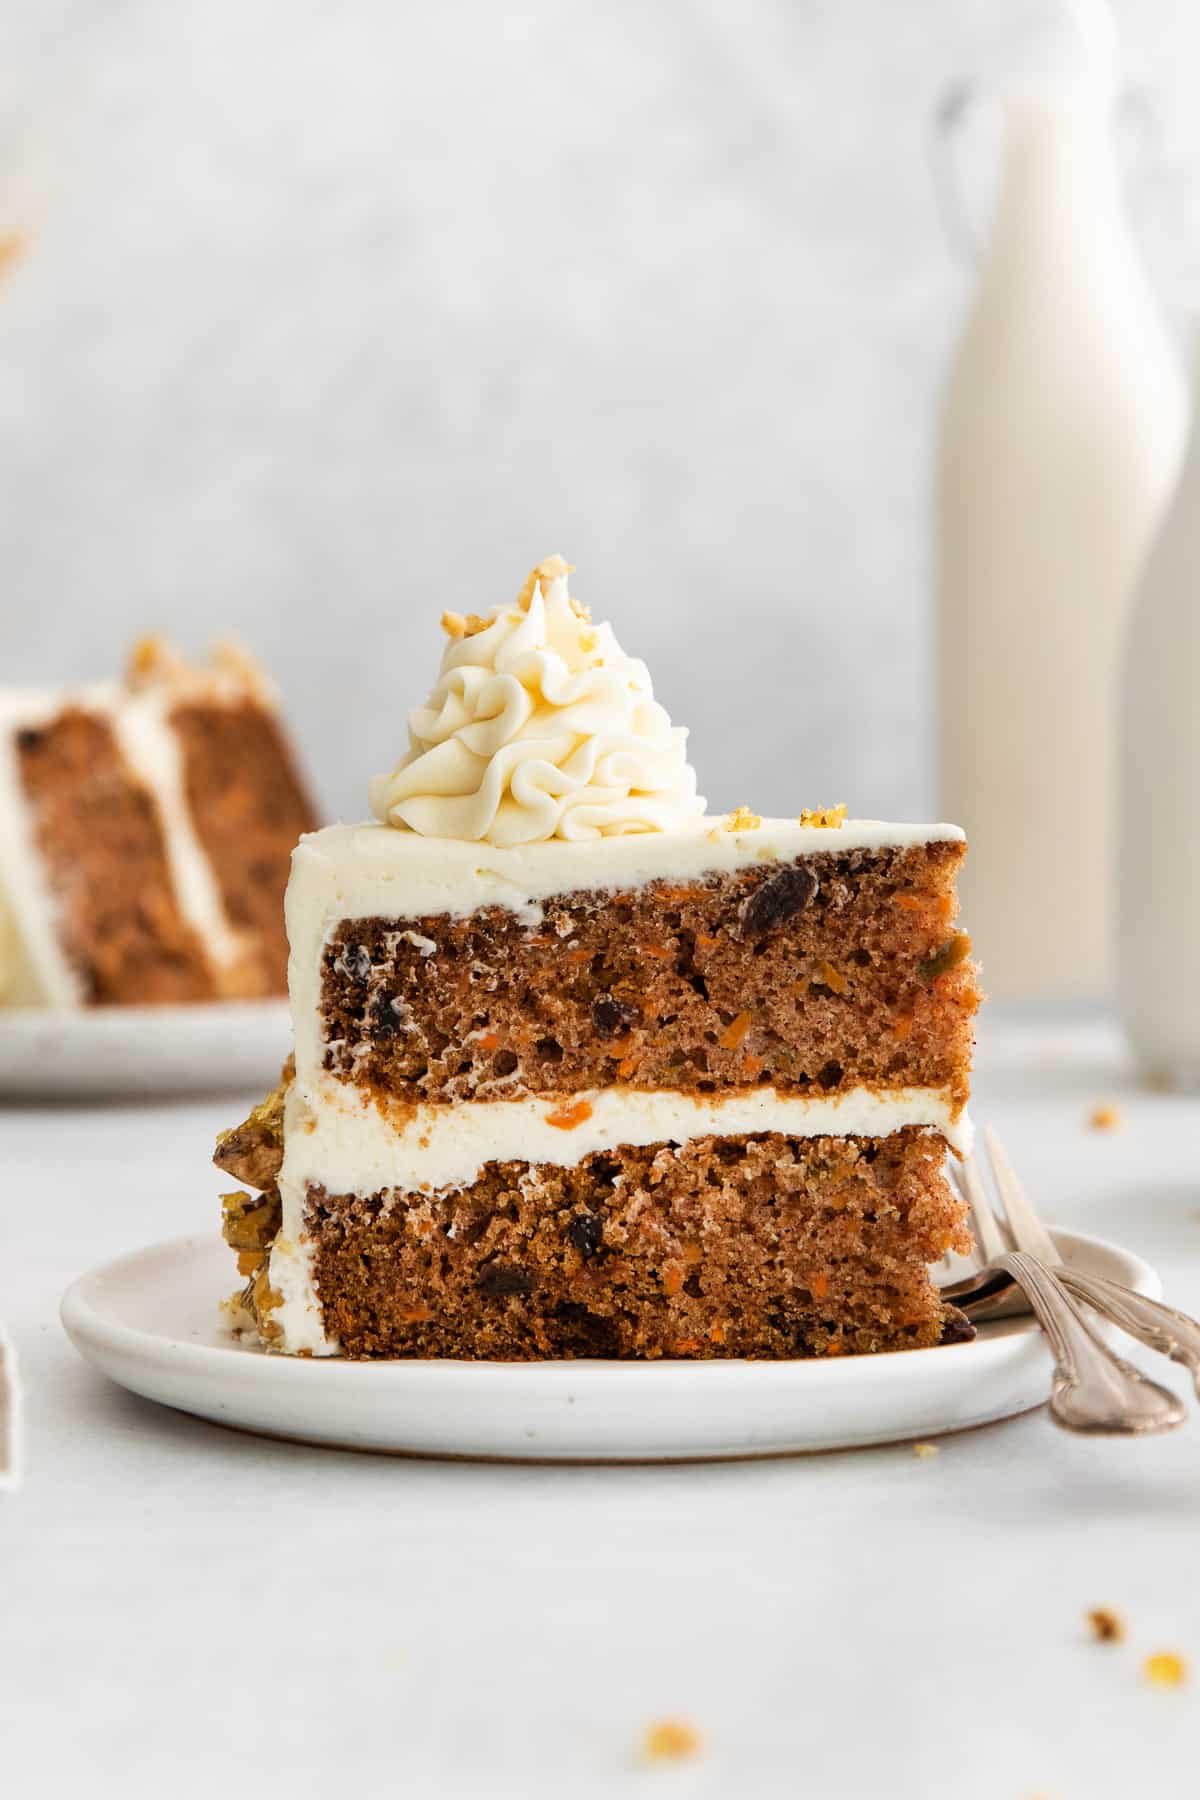 Slice of carrot cake on a plate.